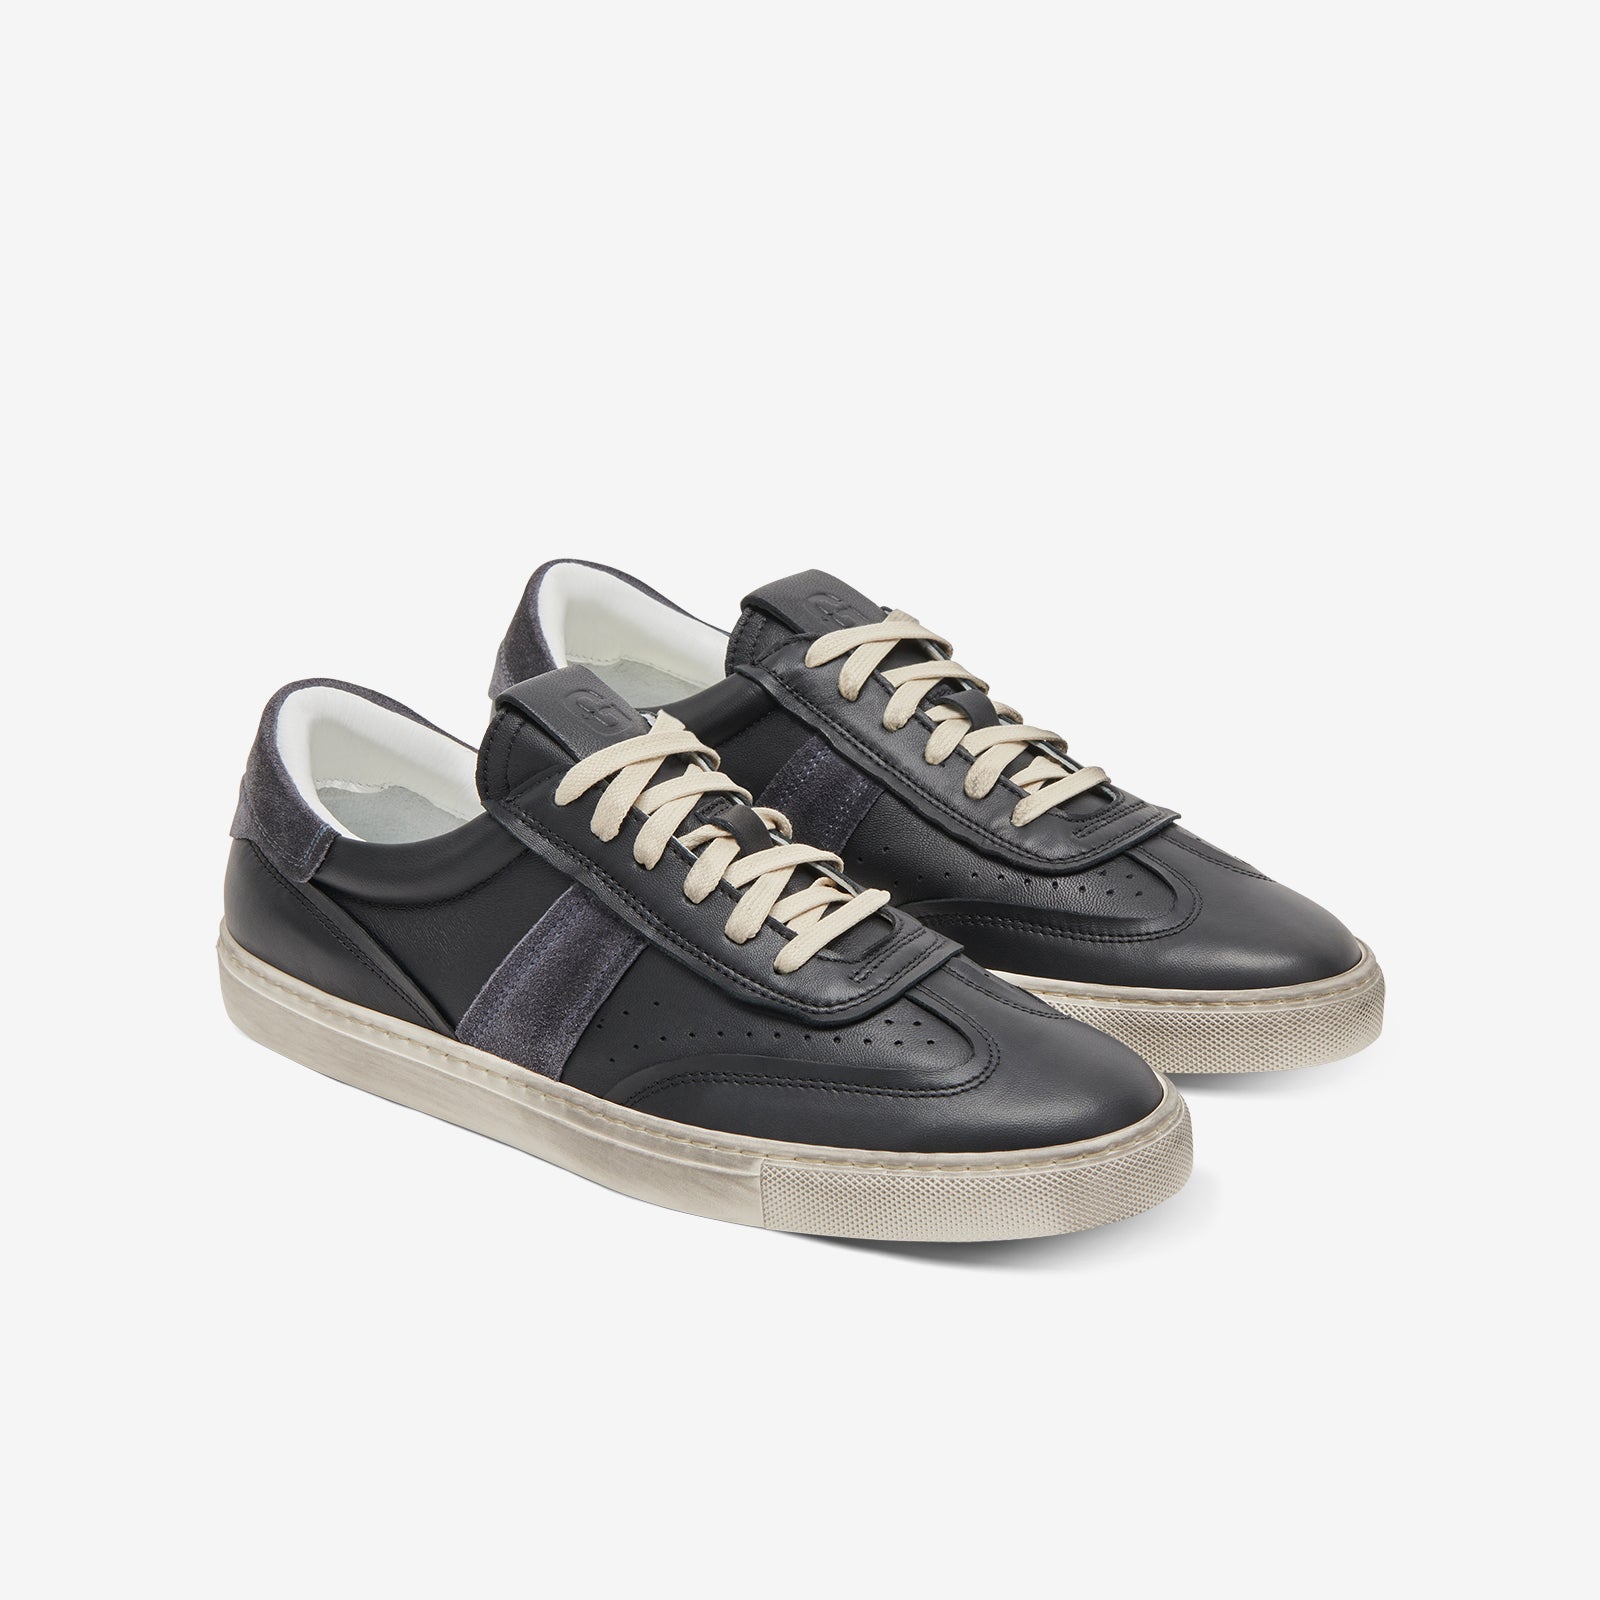 Greats - The Charlie Distressed - Black/Grey - Men's Shoe – GREATS